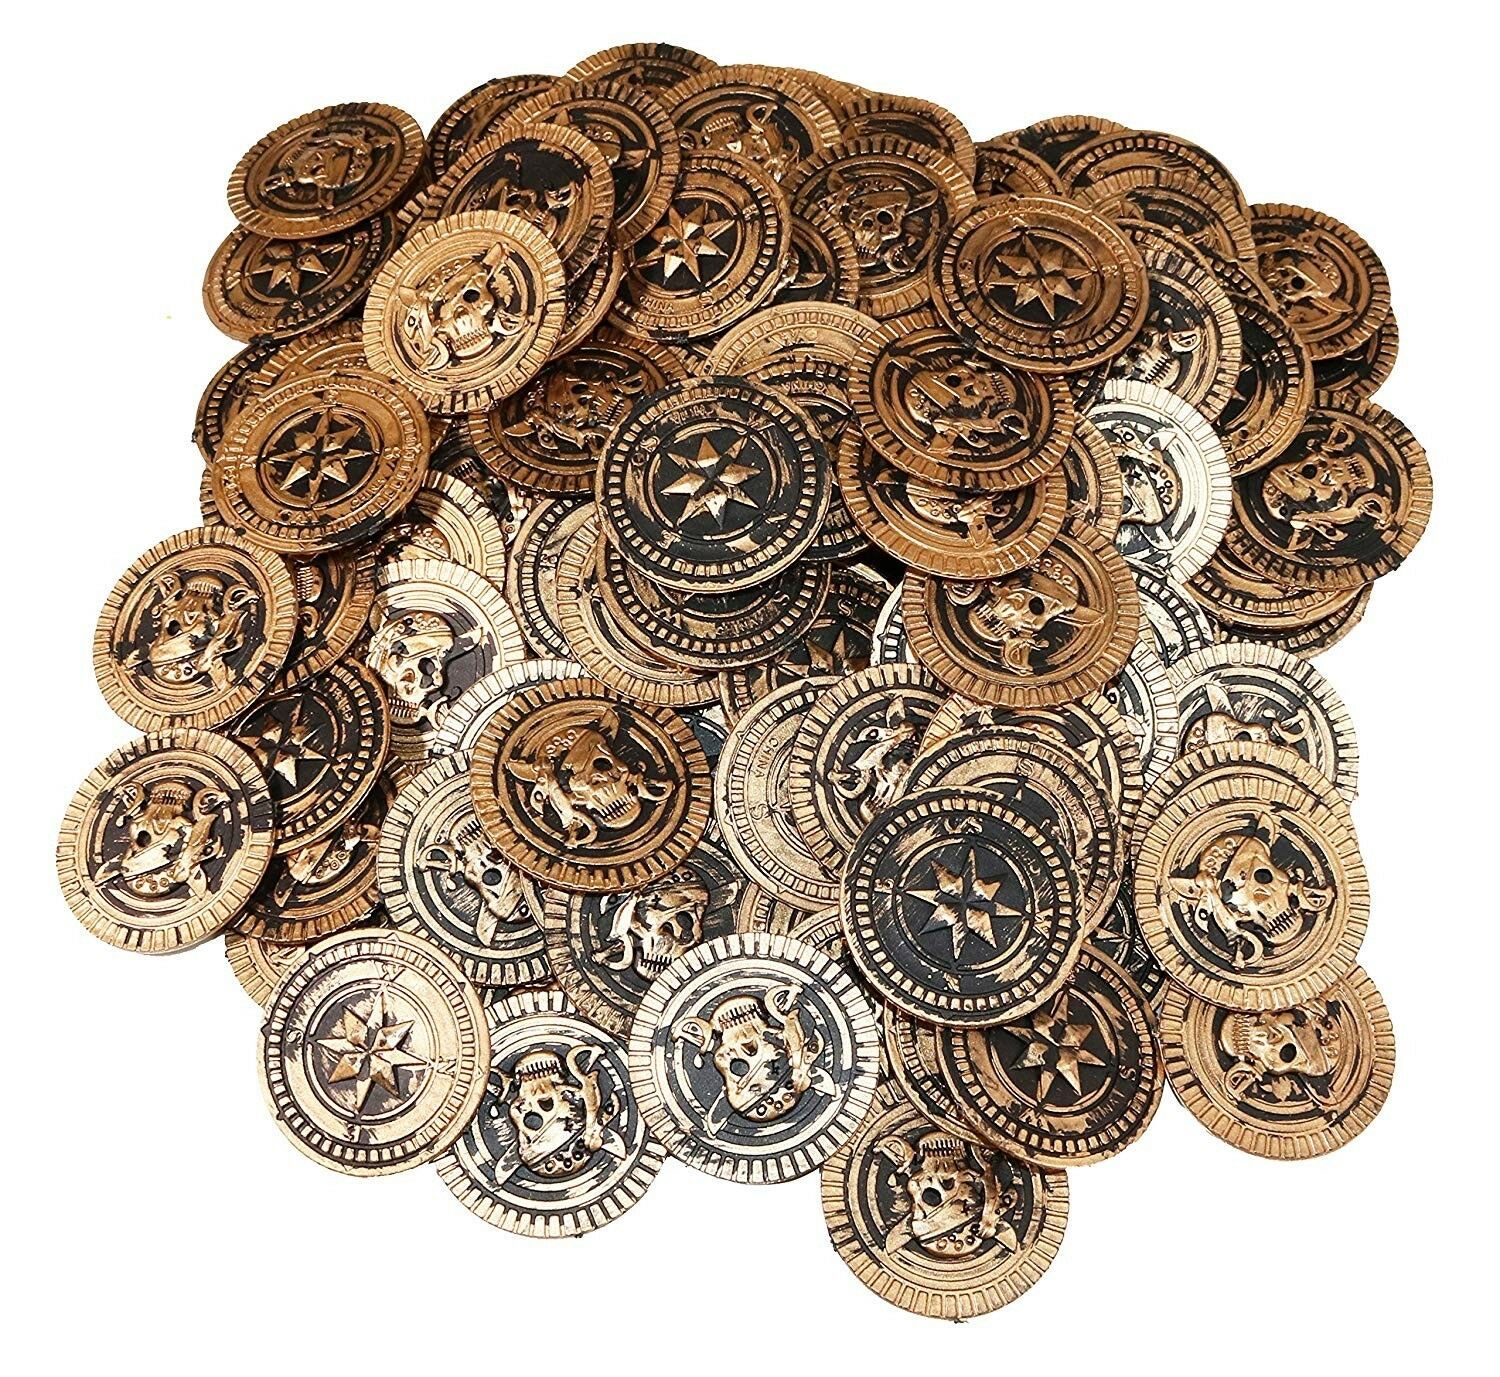 144 Plastic Rustic Vintage Brass Gold Coins Pirate Treasure Chest Money Favors